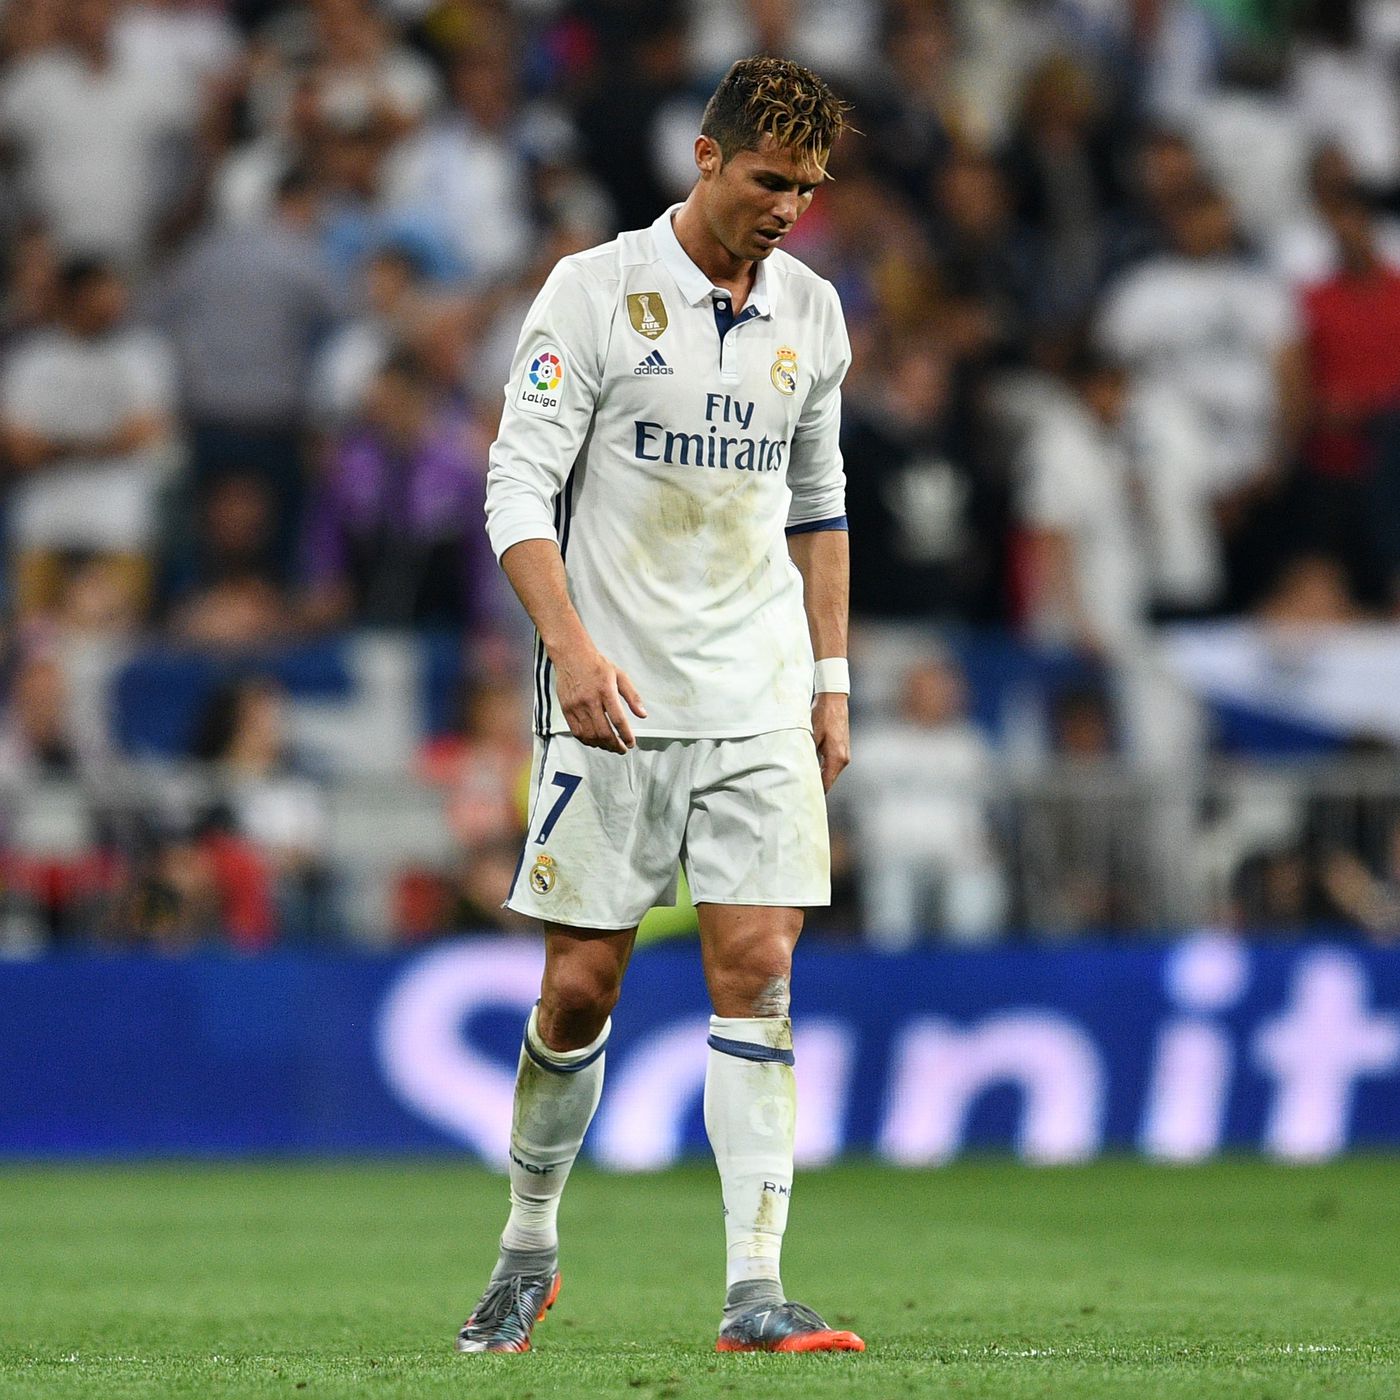 Cristiano Ronaldo rumors: Why he probably won't leave Real Madrid